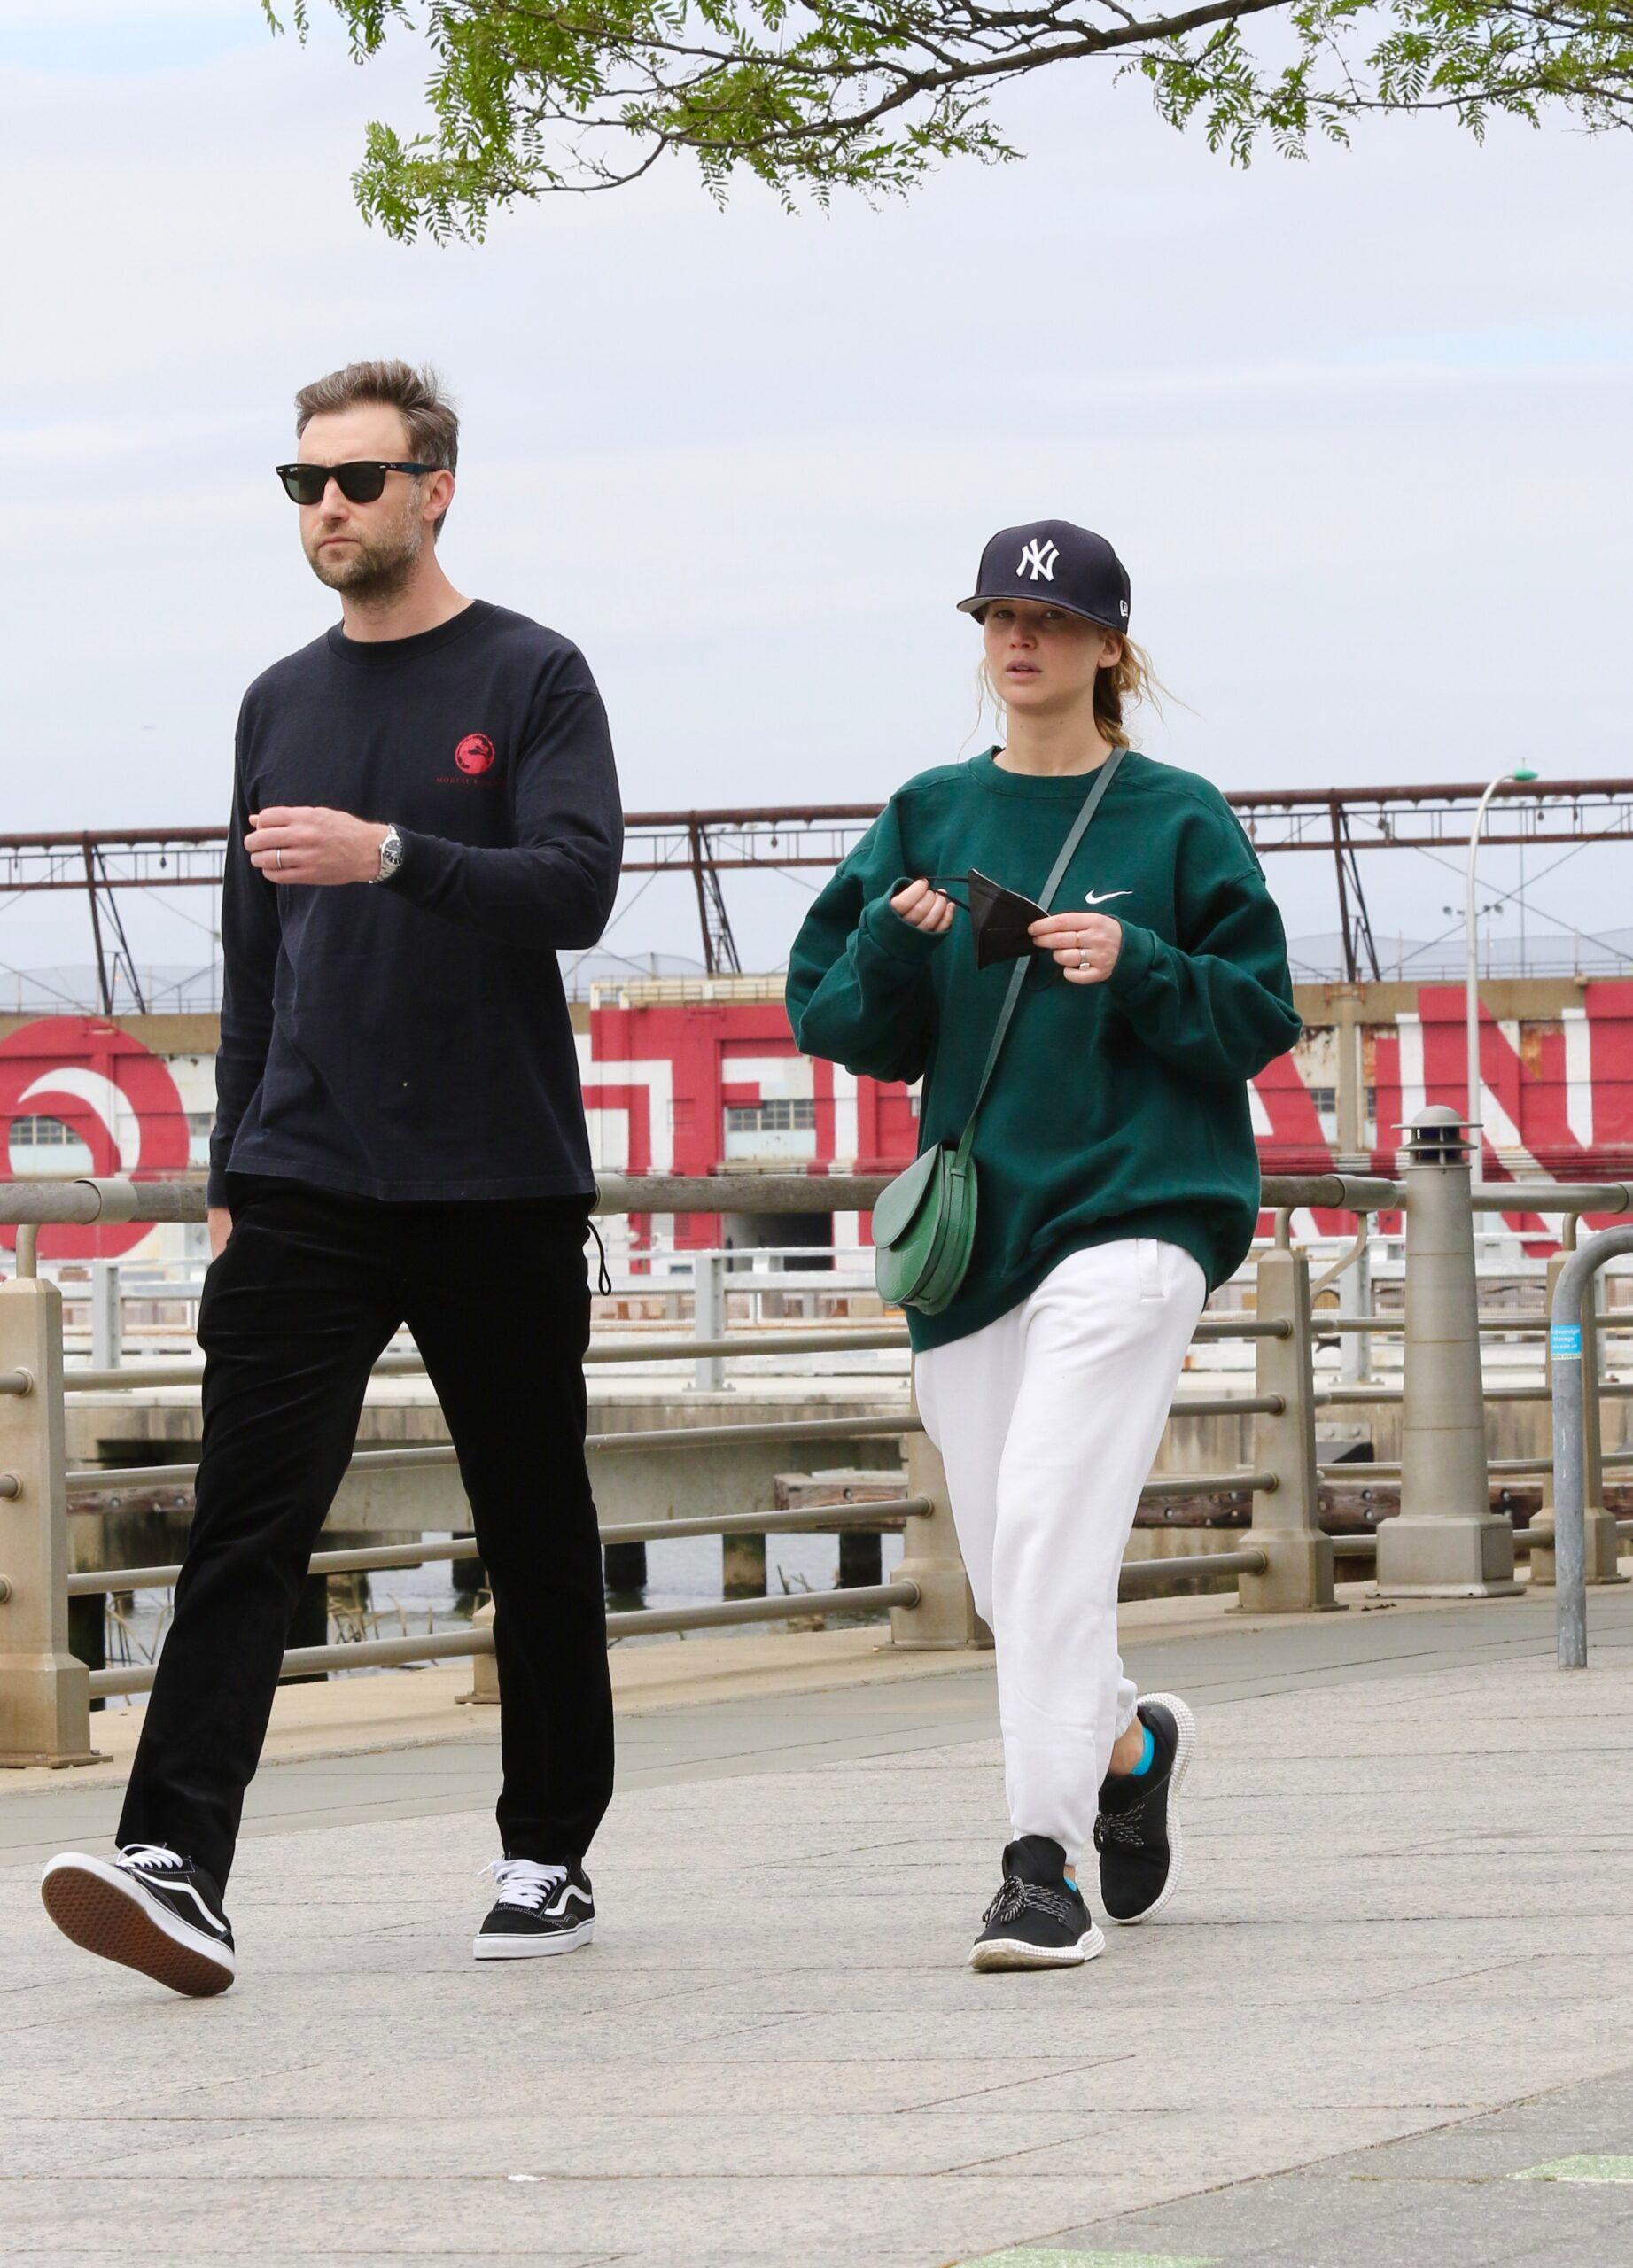 Jennifer Lawrence in sweats goes on a power walk with husband Cooke Maroney in Manhattan’s Hudson River Park. The happy couple spent more than an hour walking along the riverfront. 24 May 2021 Pictured: Jennifer Lawrence and Cooke Maroney. Photo credit: LRNYC / MEGA TheMegaAgency.com +1 888 505 6342 (Mega Agency TagID: MEGA757256_001.jpg) [Photo via Mega Agency]